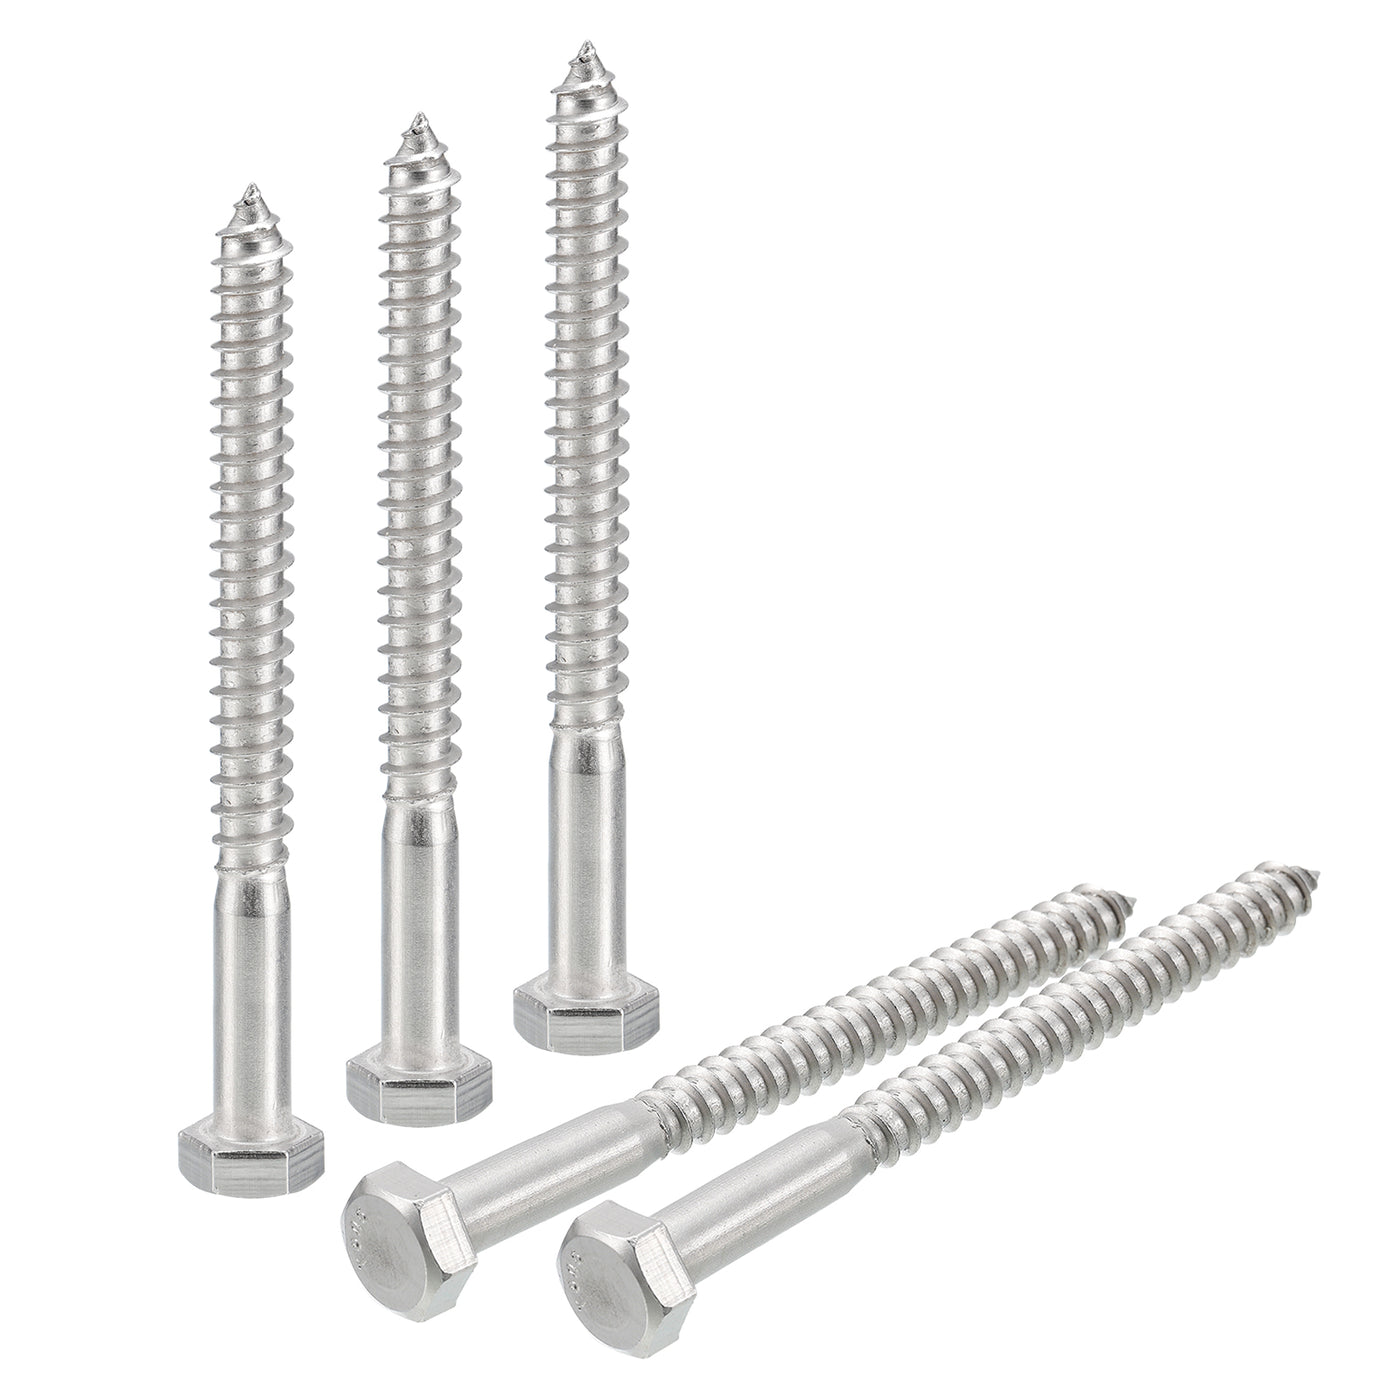 uxcell Uxcell Hex Head Lag Screws Bolts, 10pcs 5/16" x 3-1/2" 304 Stainless Steel Wood Screws